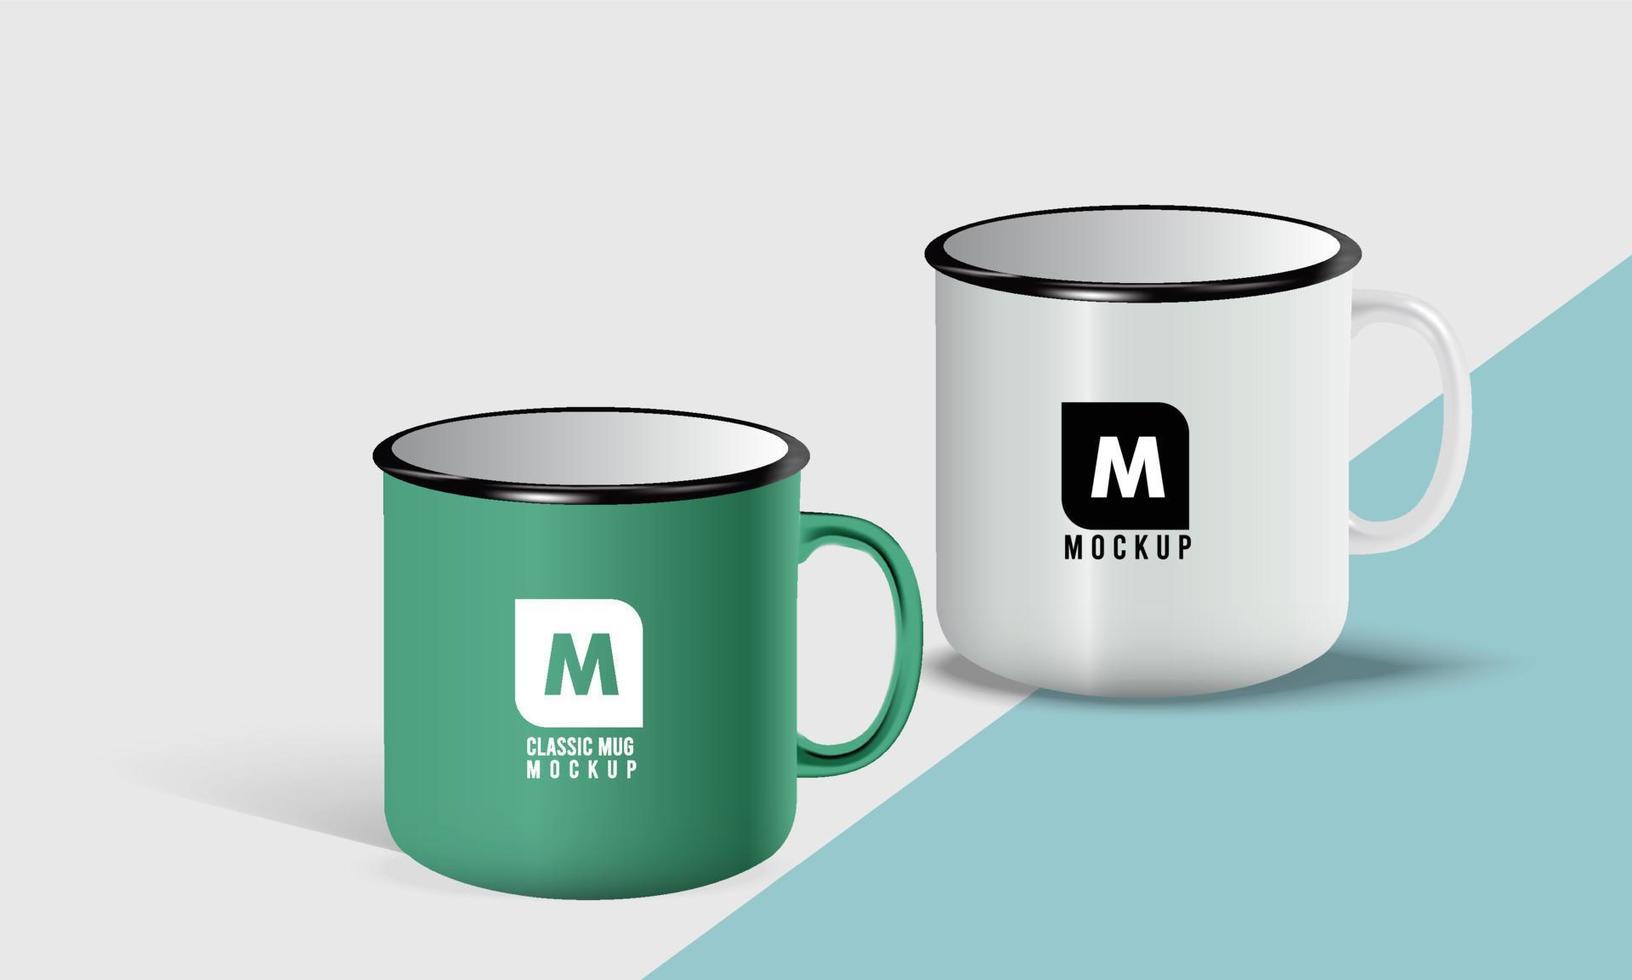 Ceramic coffee cup mug mockup design with a background vector